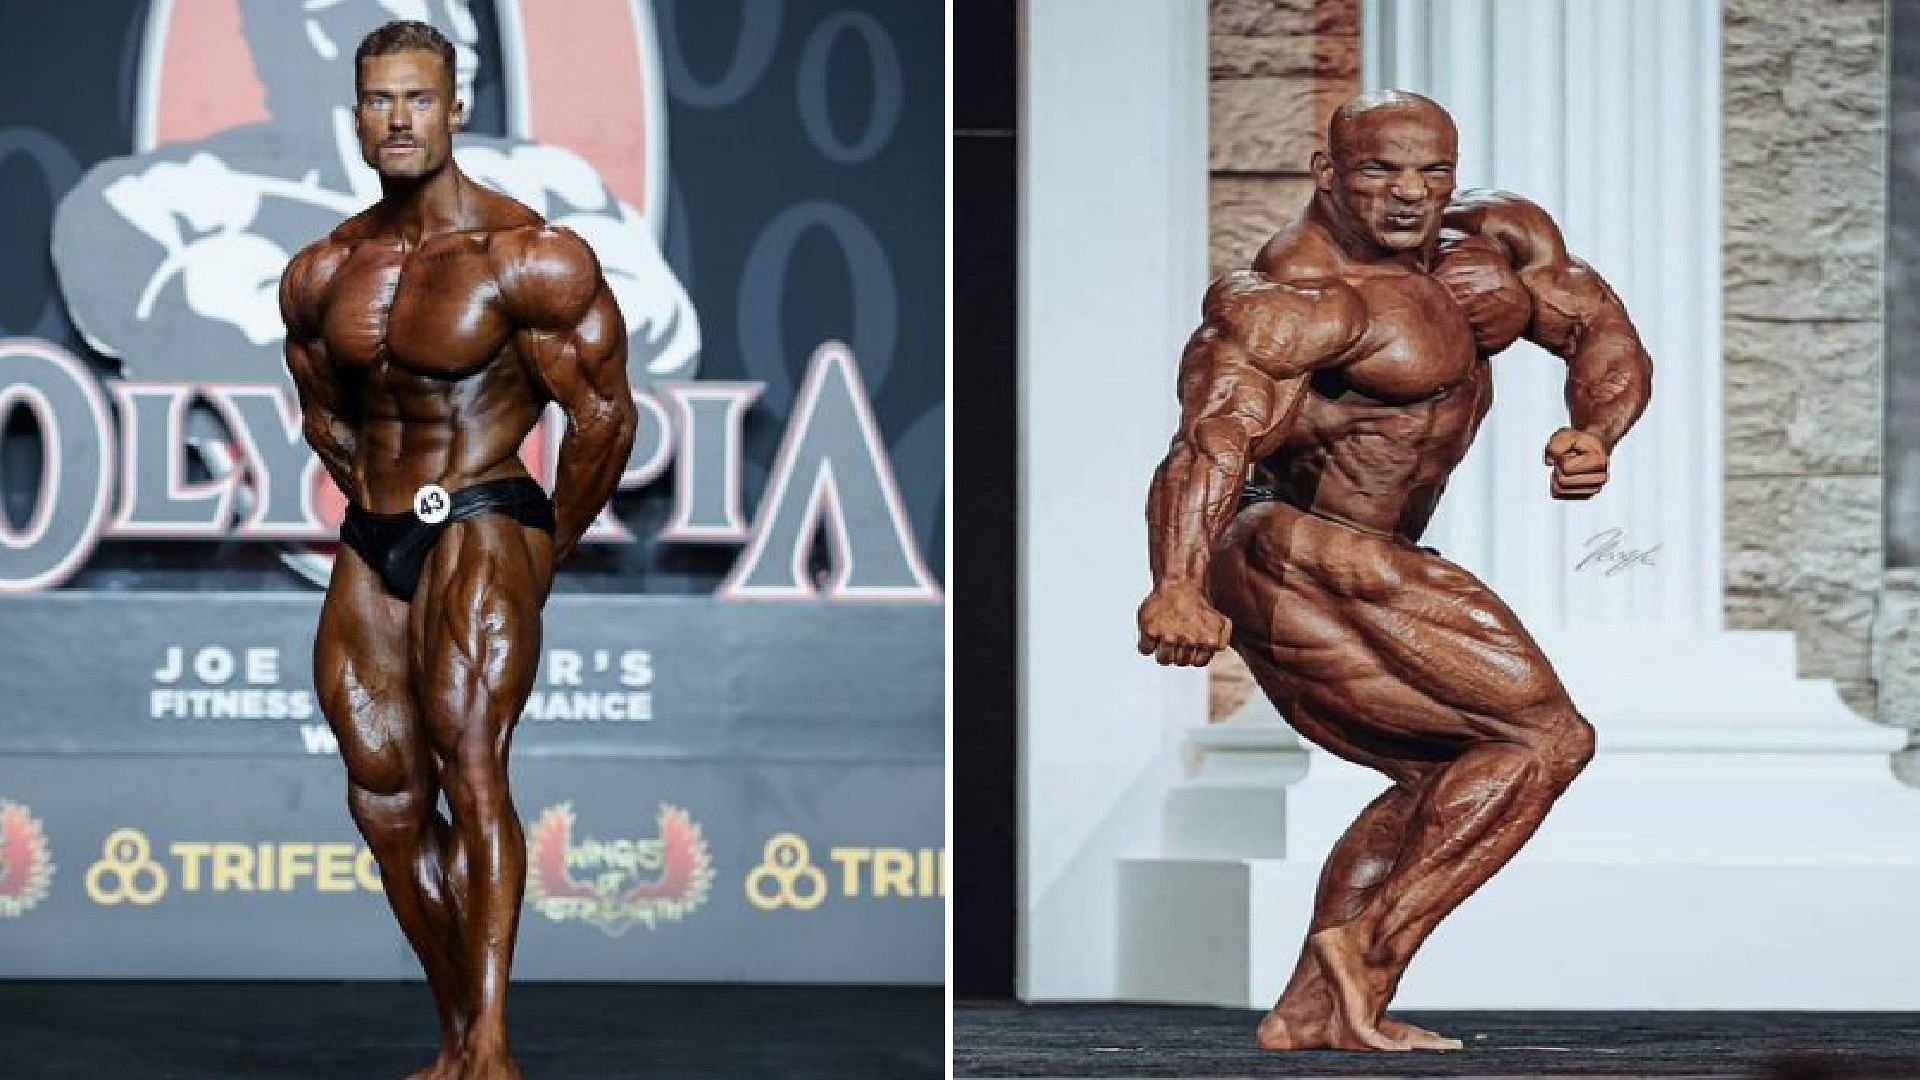 Classic Physique Olympia vs Mr Olympia What is the difference?